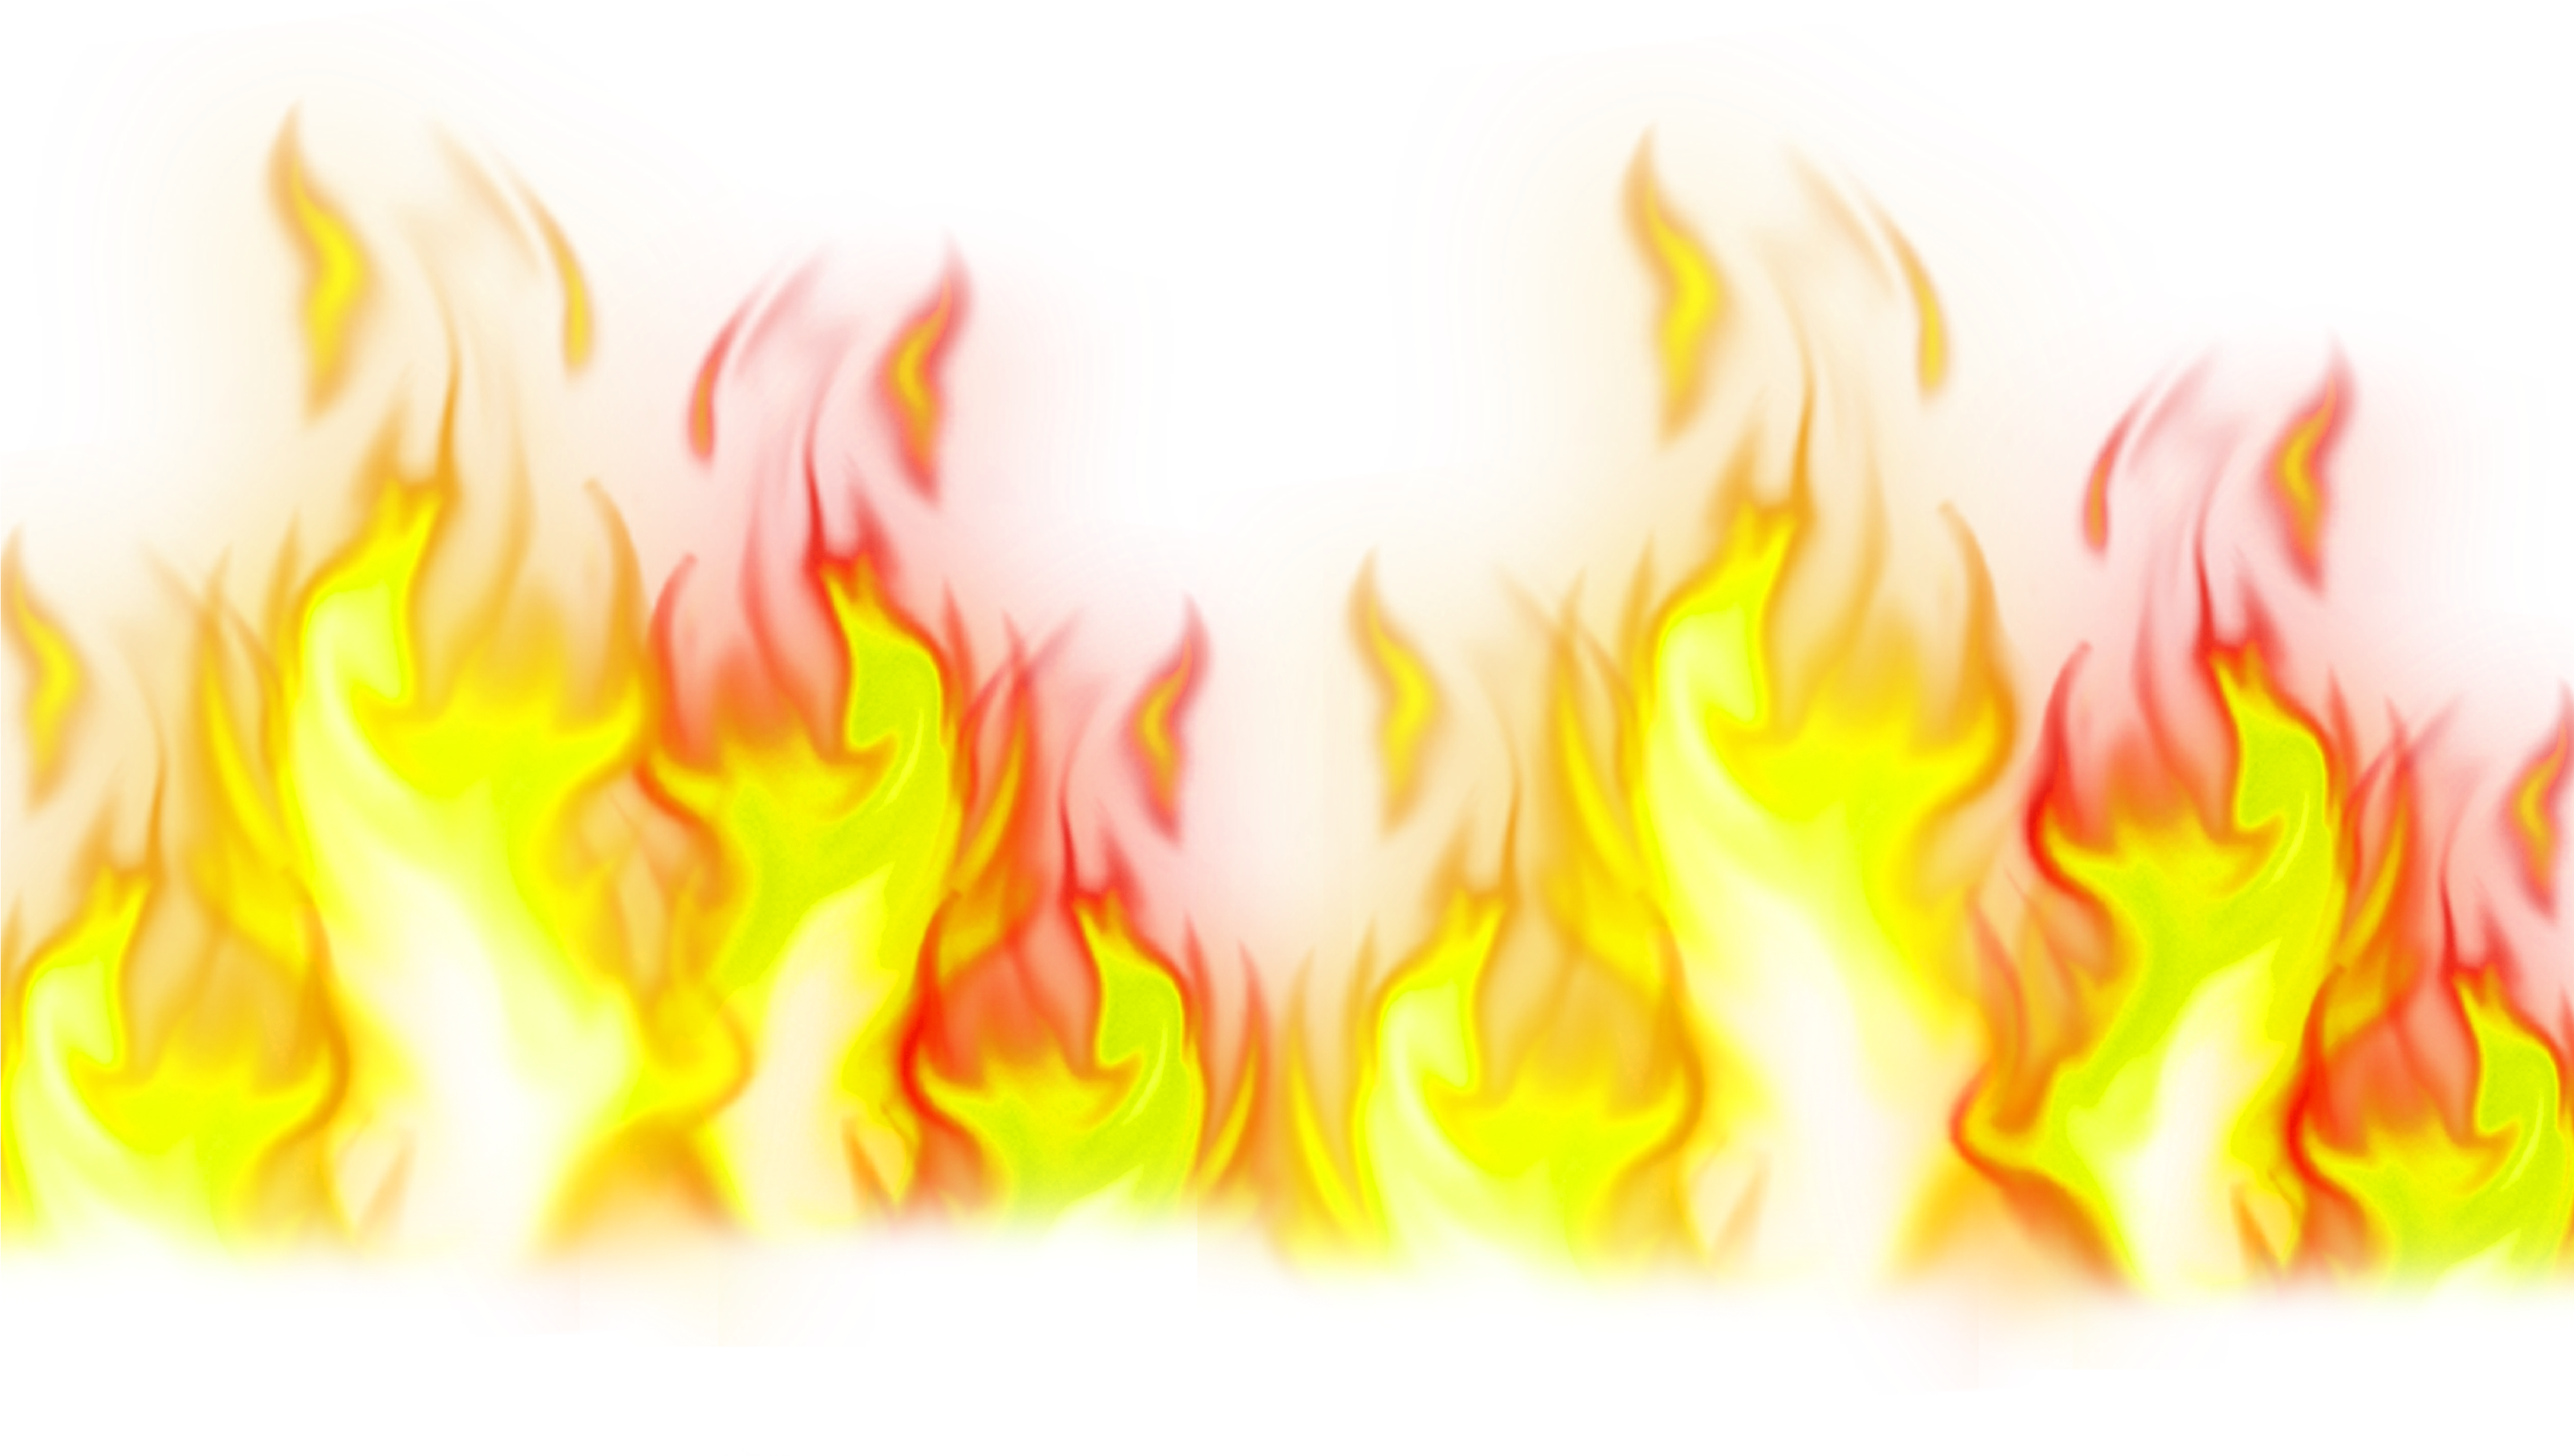 Flame Combustion Array Data Structure - Flame (4331x4331)